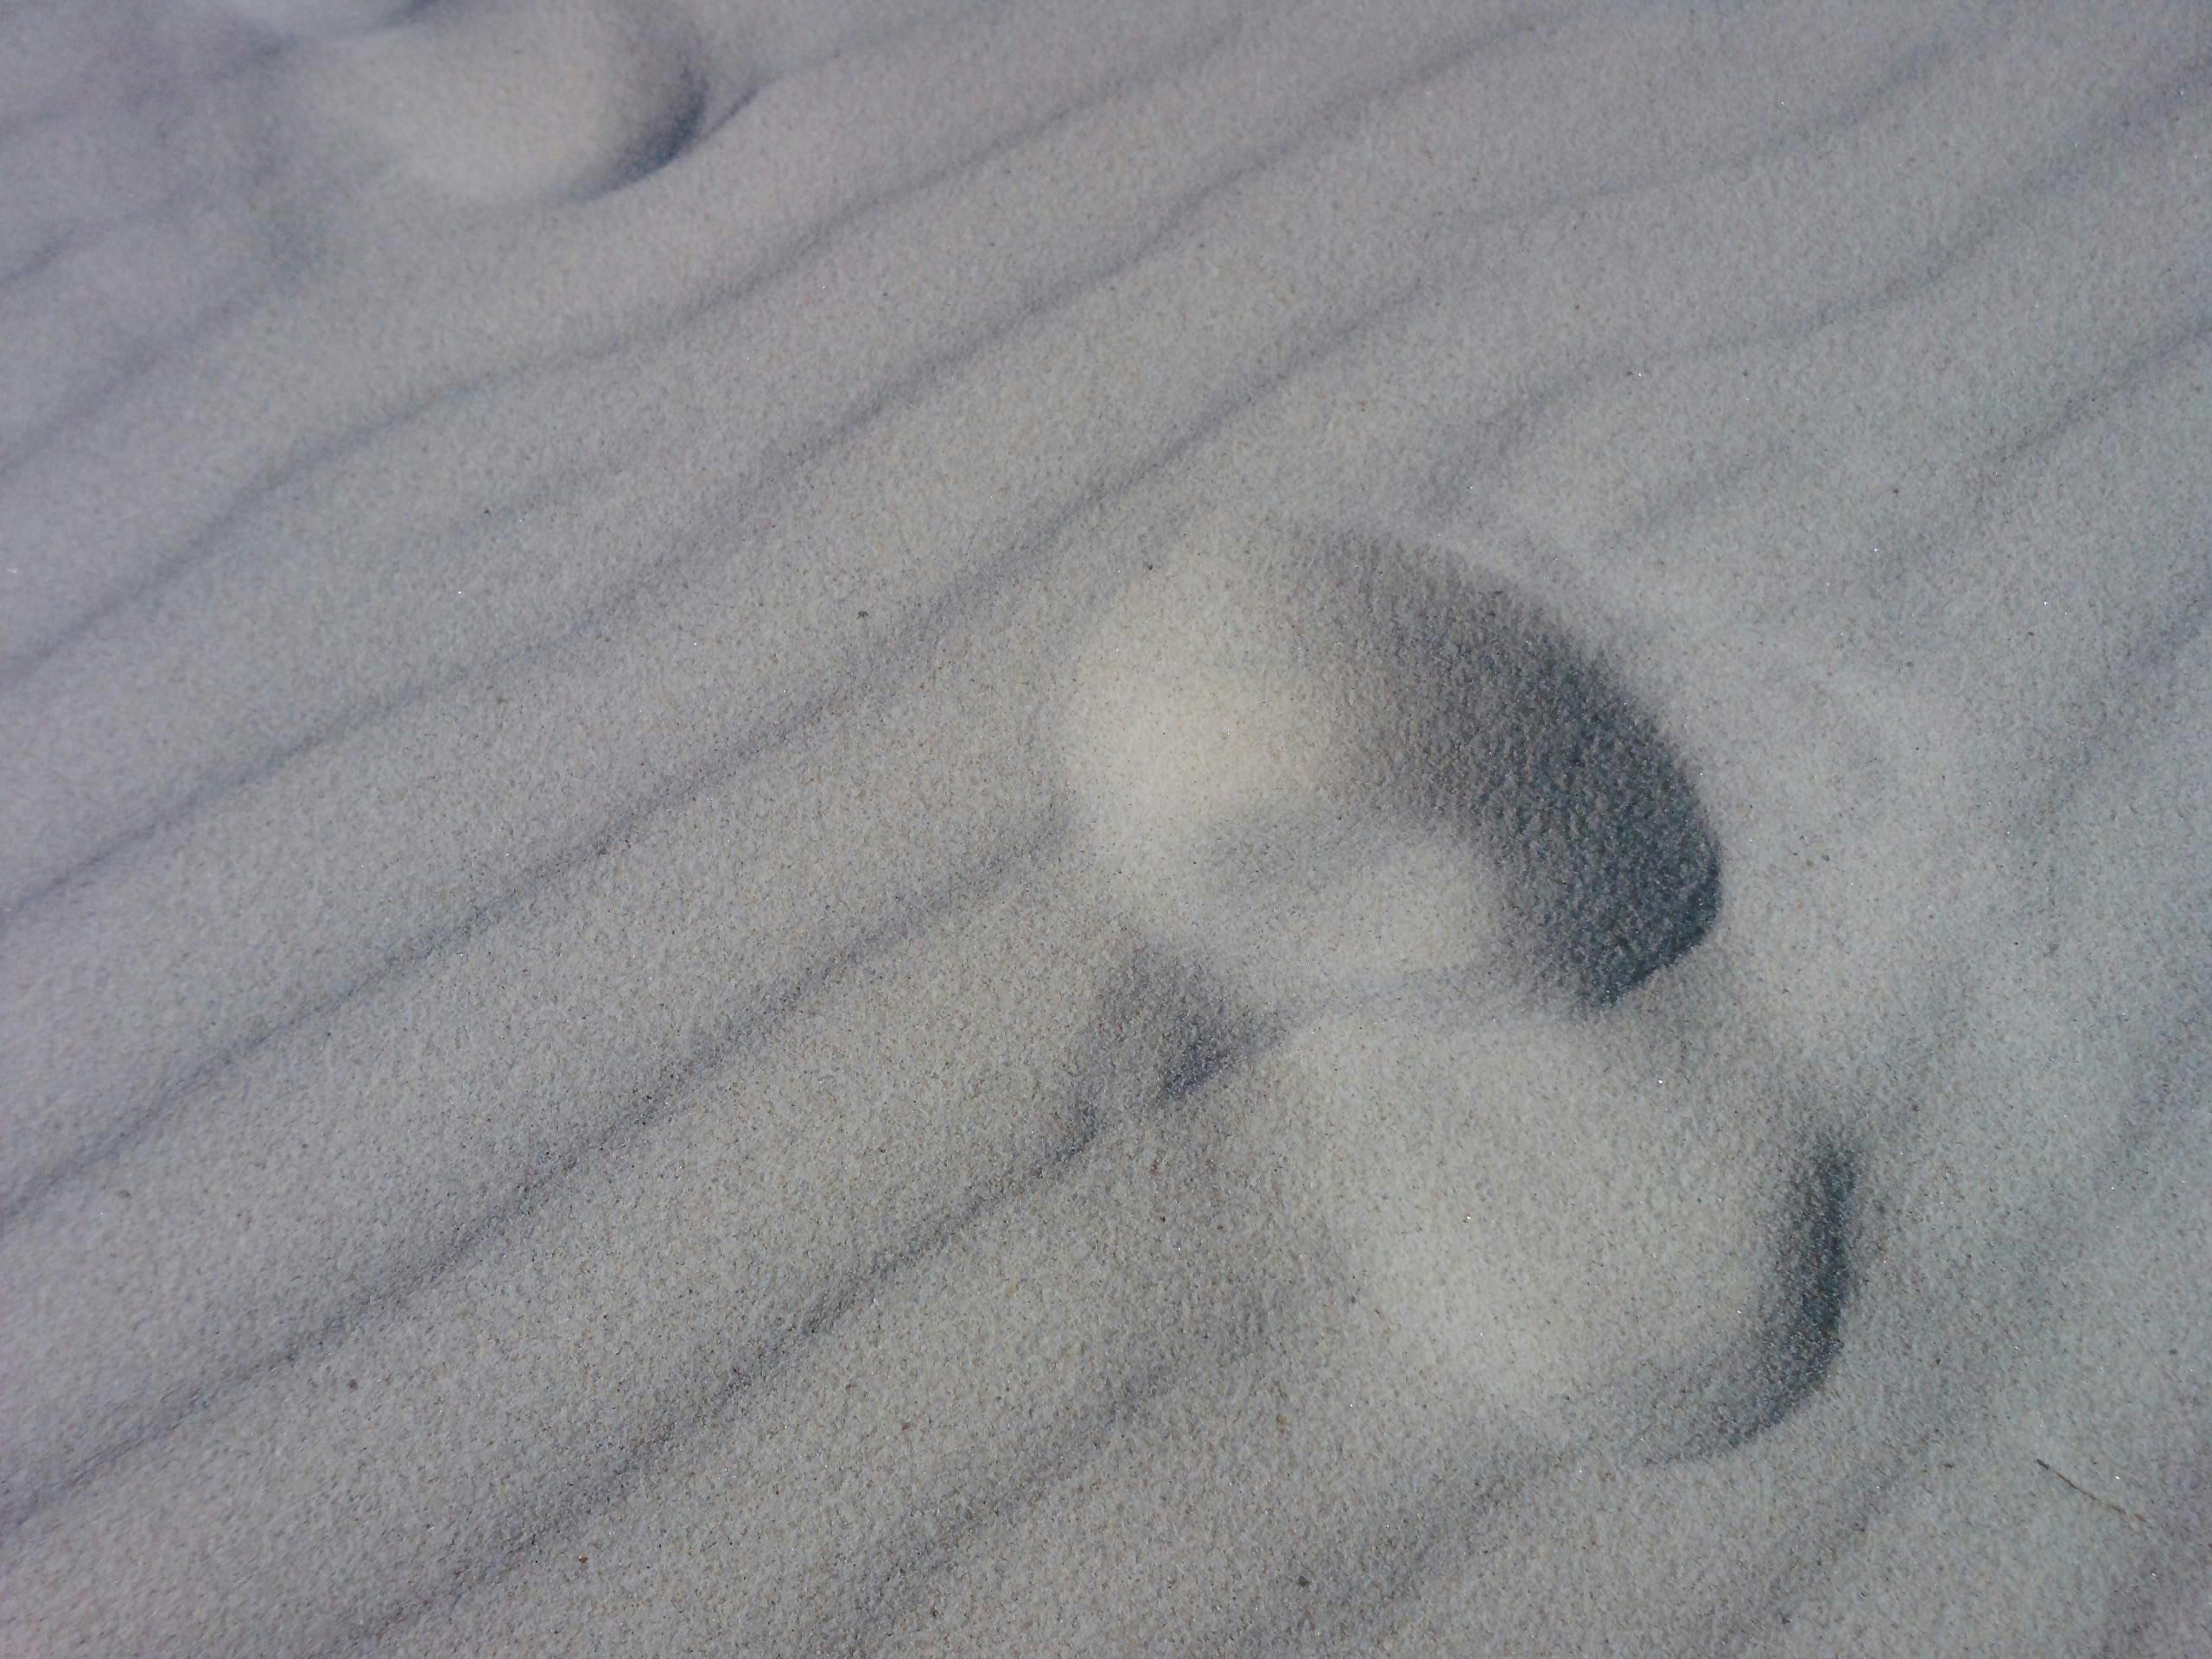 Free stock photo of Foot prints in the sand, footprints, sand